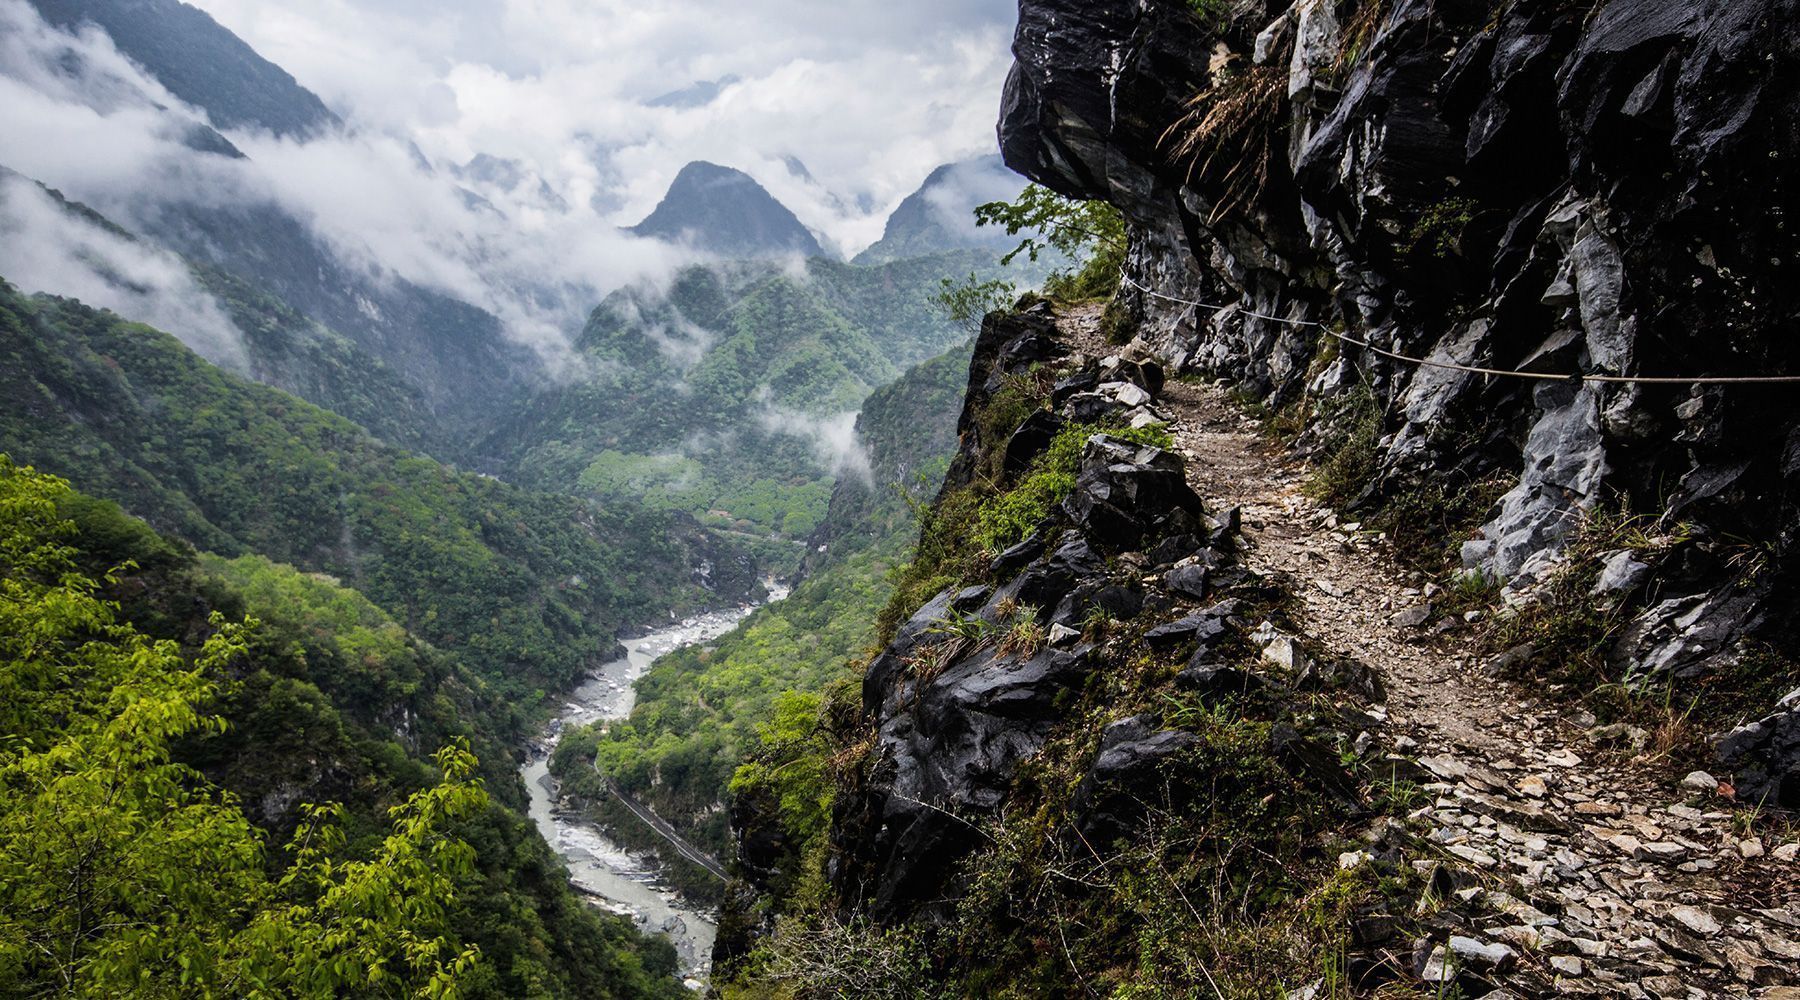 Nick Walton journeys beyond the Snow Mountains to explore the ruggedly beautiful east coast of Taiwan, a side of Formosa inspired by its traditions and defined by its geography.